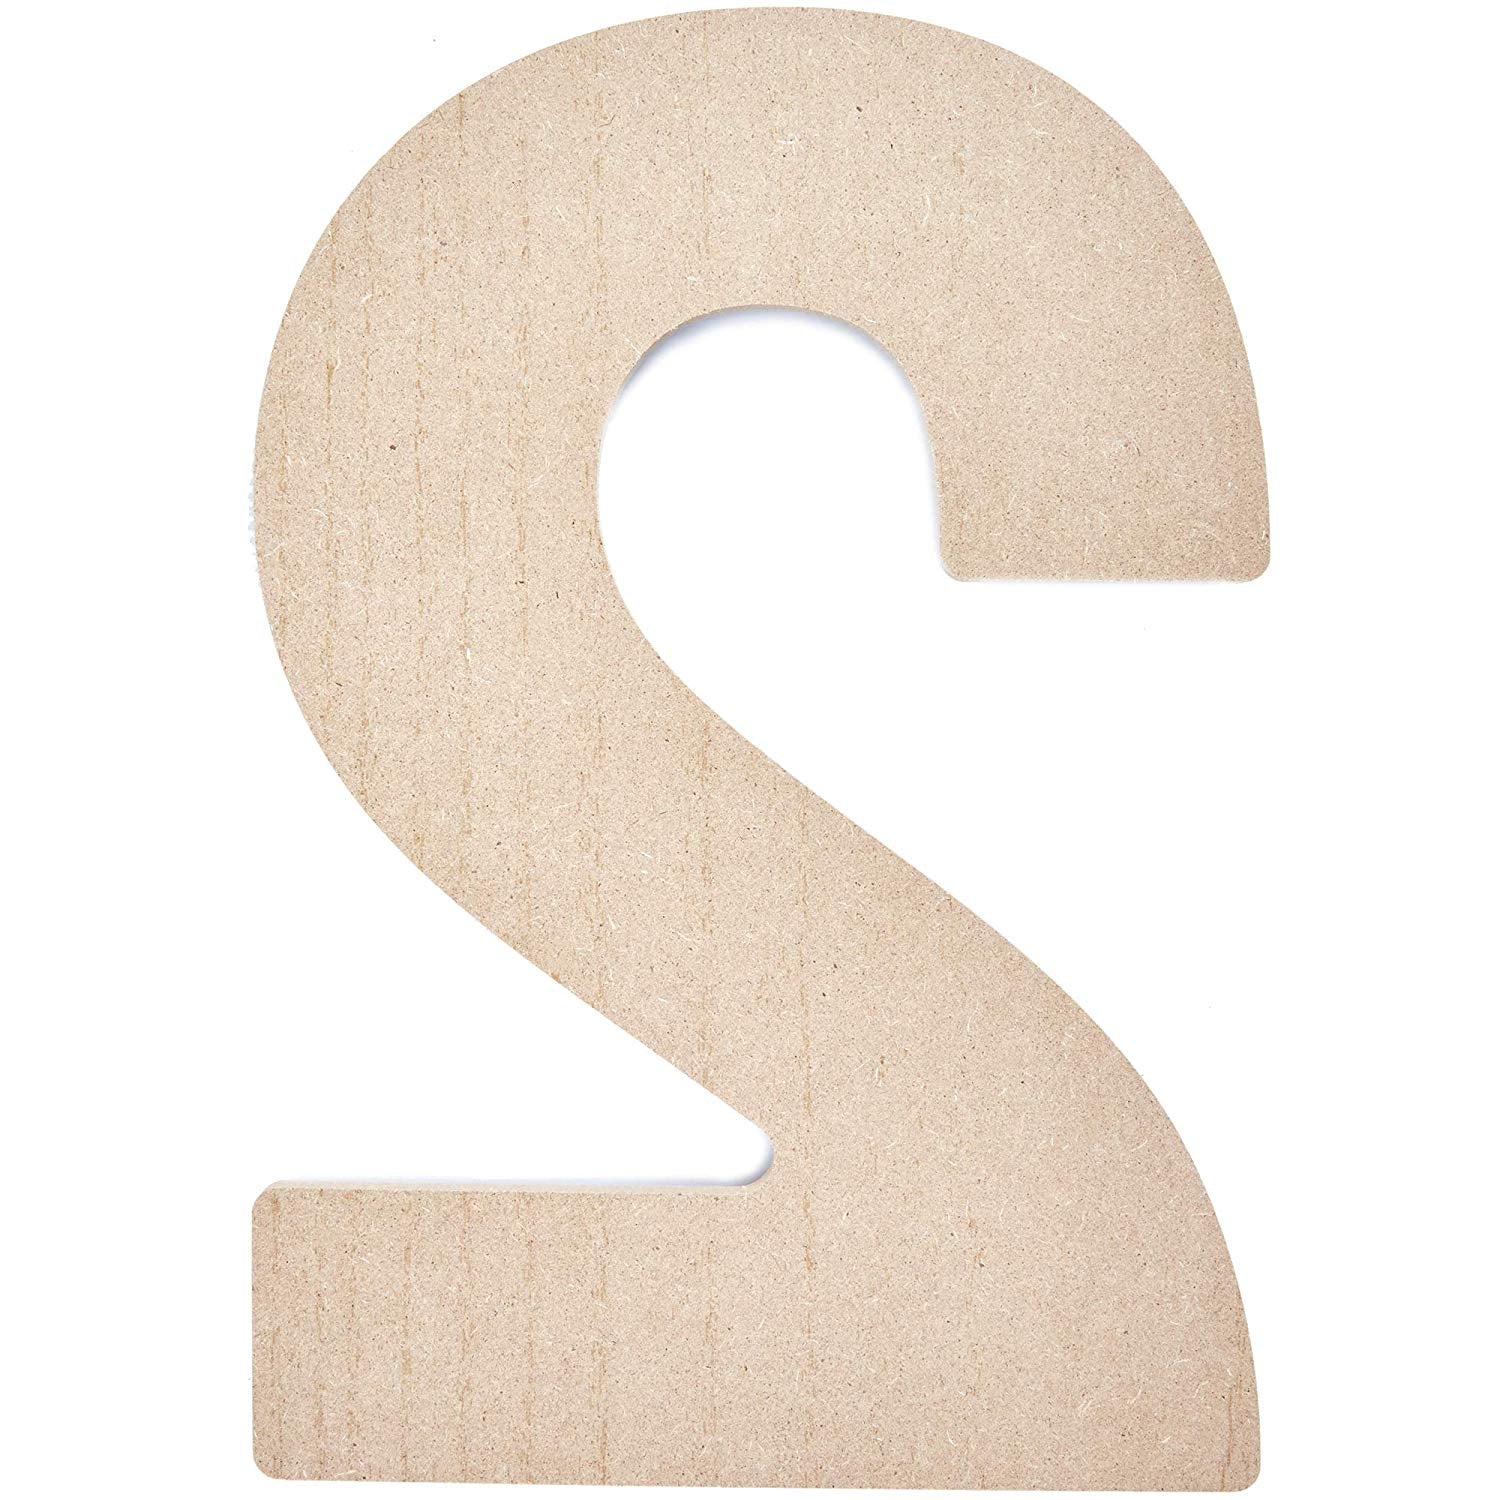 Bright Creations Unfinished Wooden Numbers for Crafts, 0-9 (12 Inches, 10 Pieces)